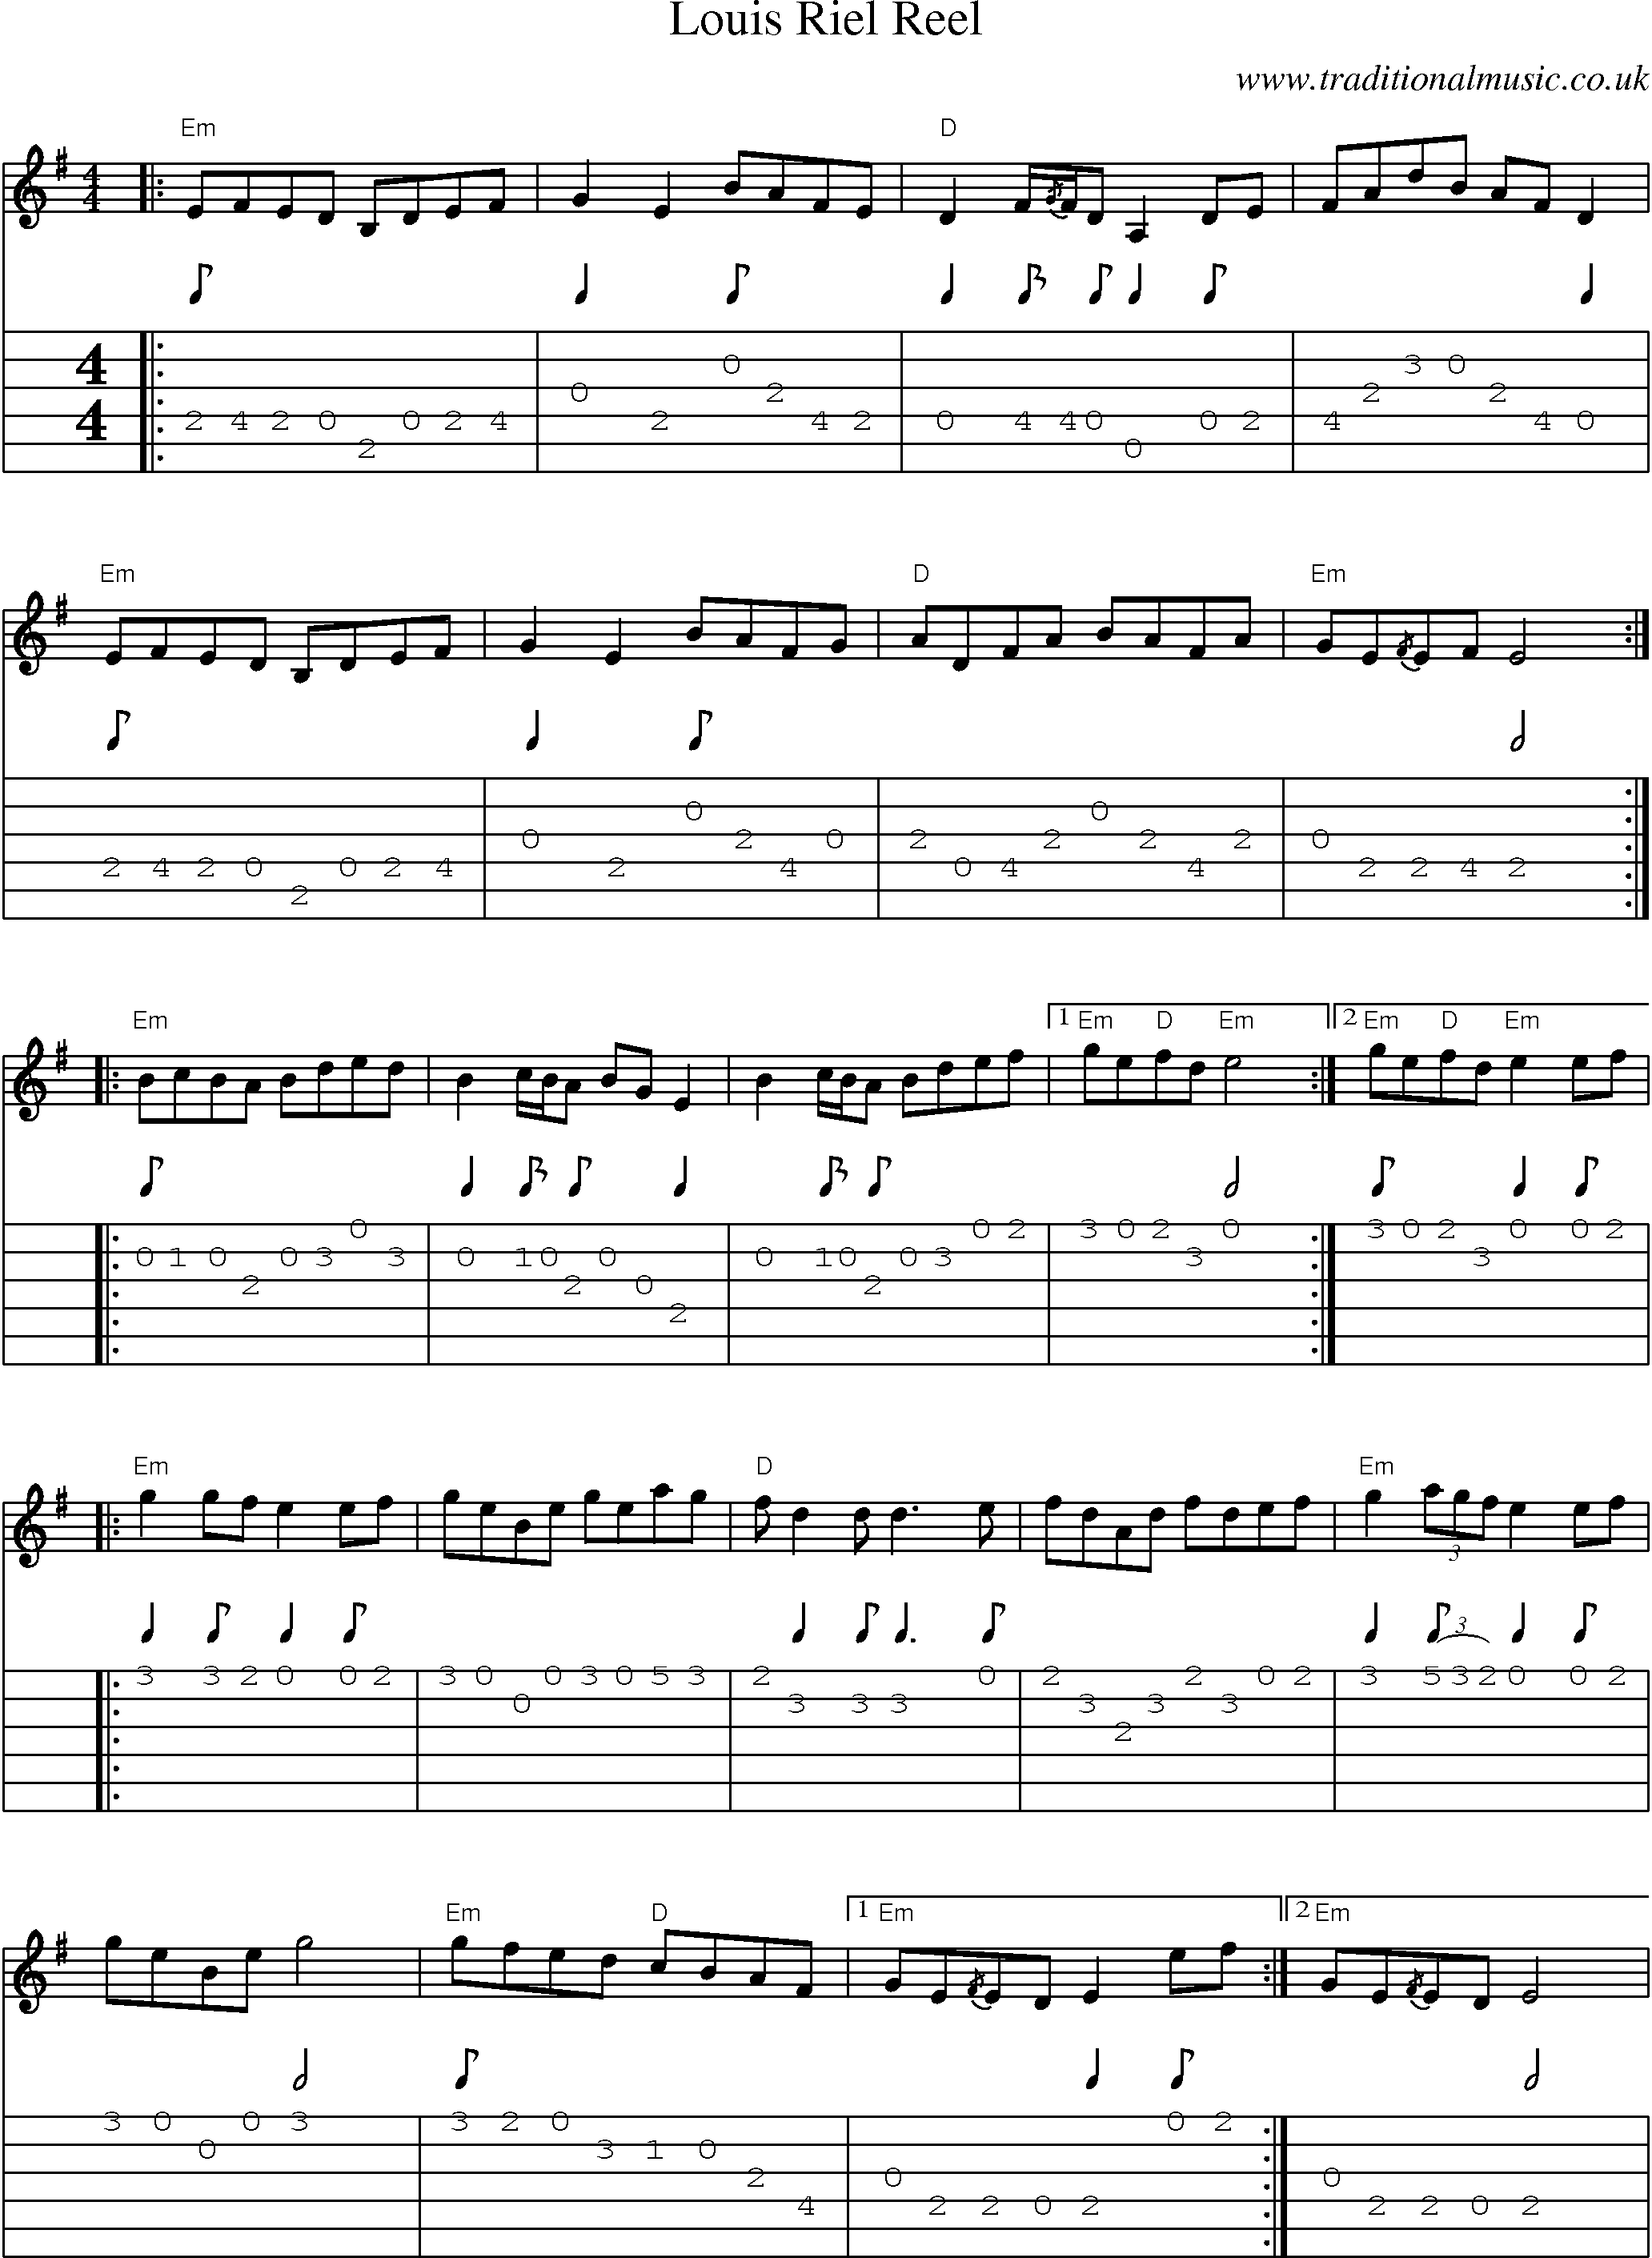 Music Score and Guitar Tabs for Louis Riel Reel